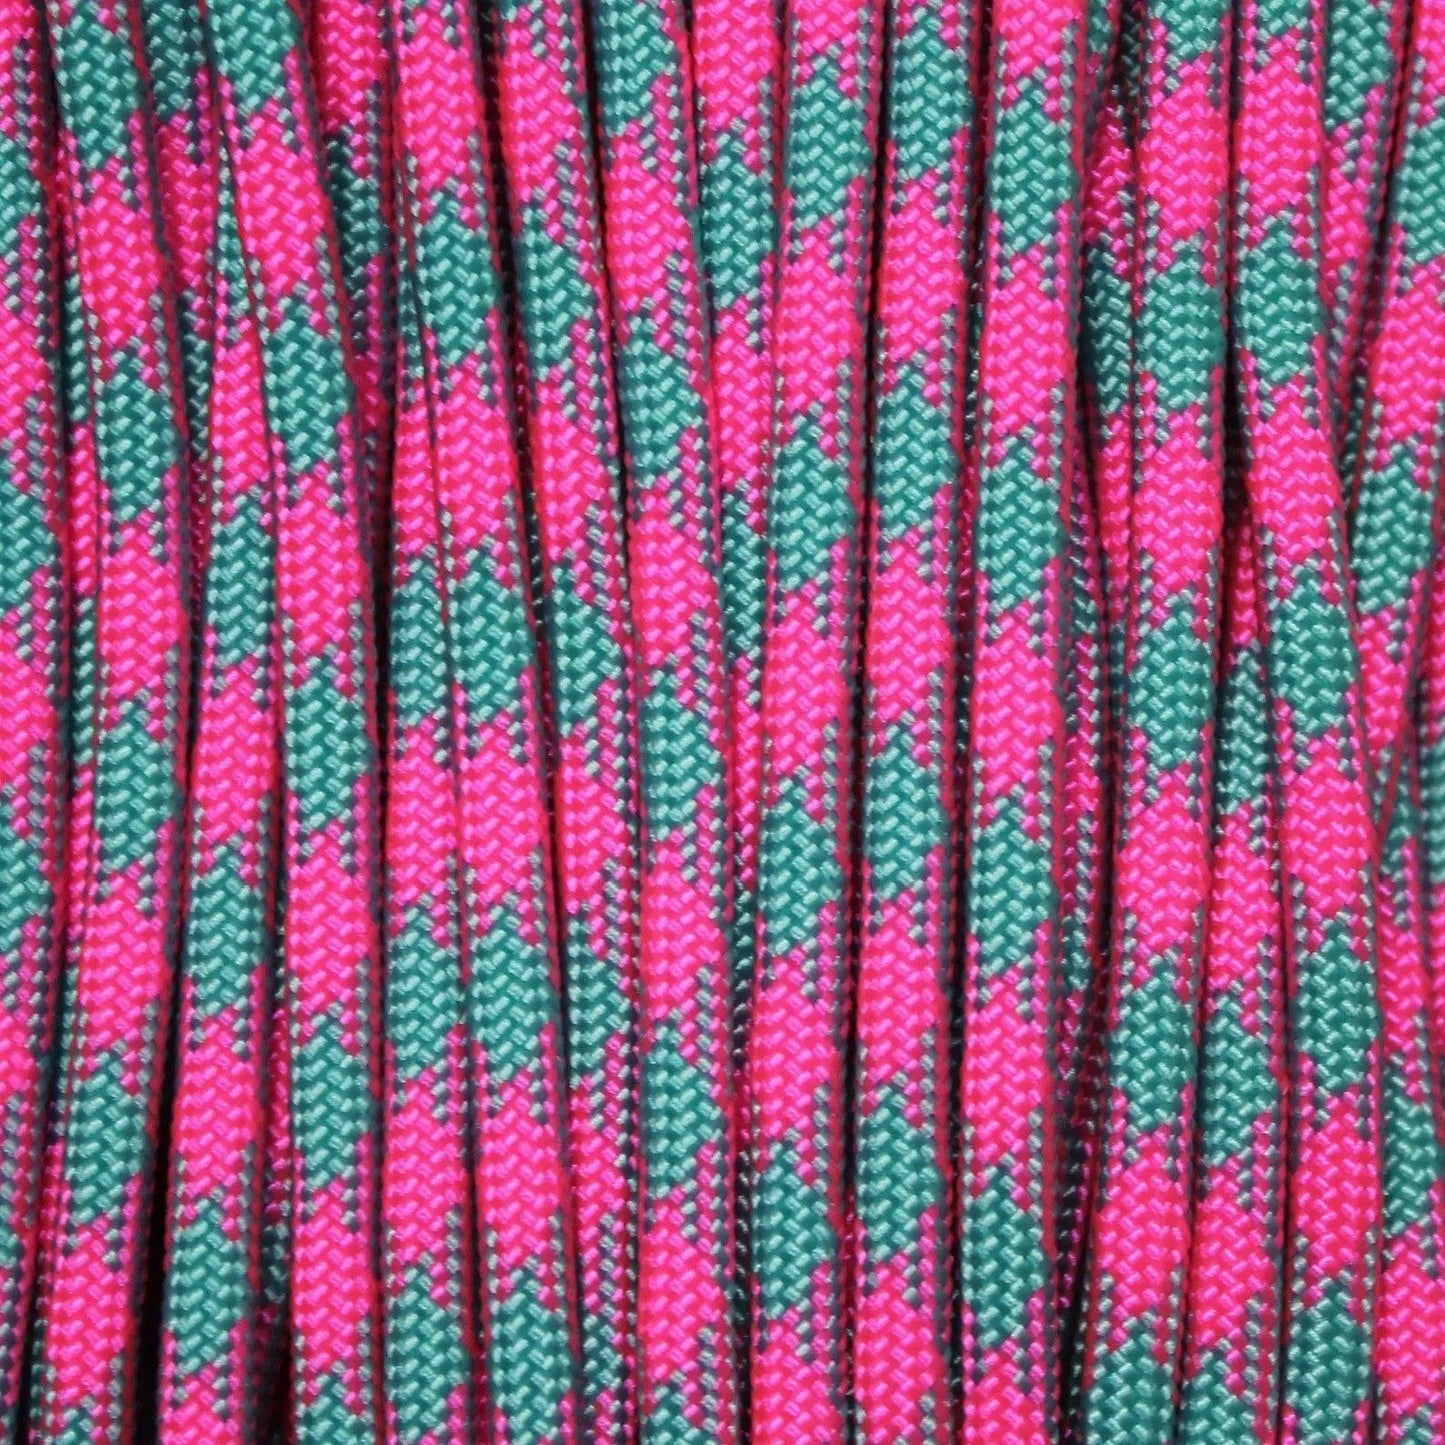 Cotton Candy 550 Paracord Made in the USA 100Feet 163- nylon/nylon paracord